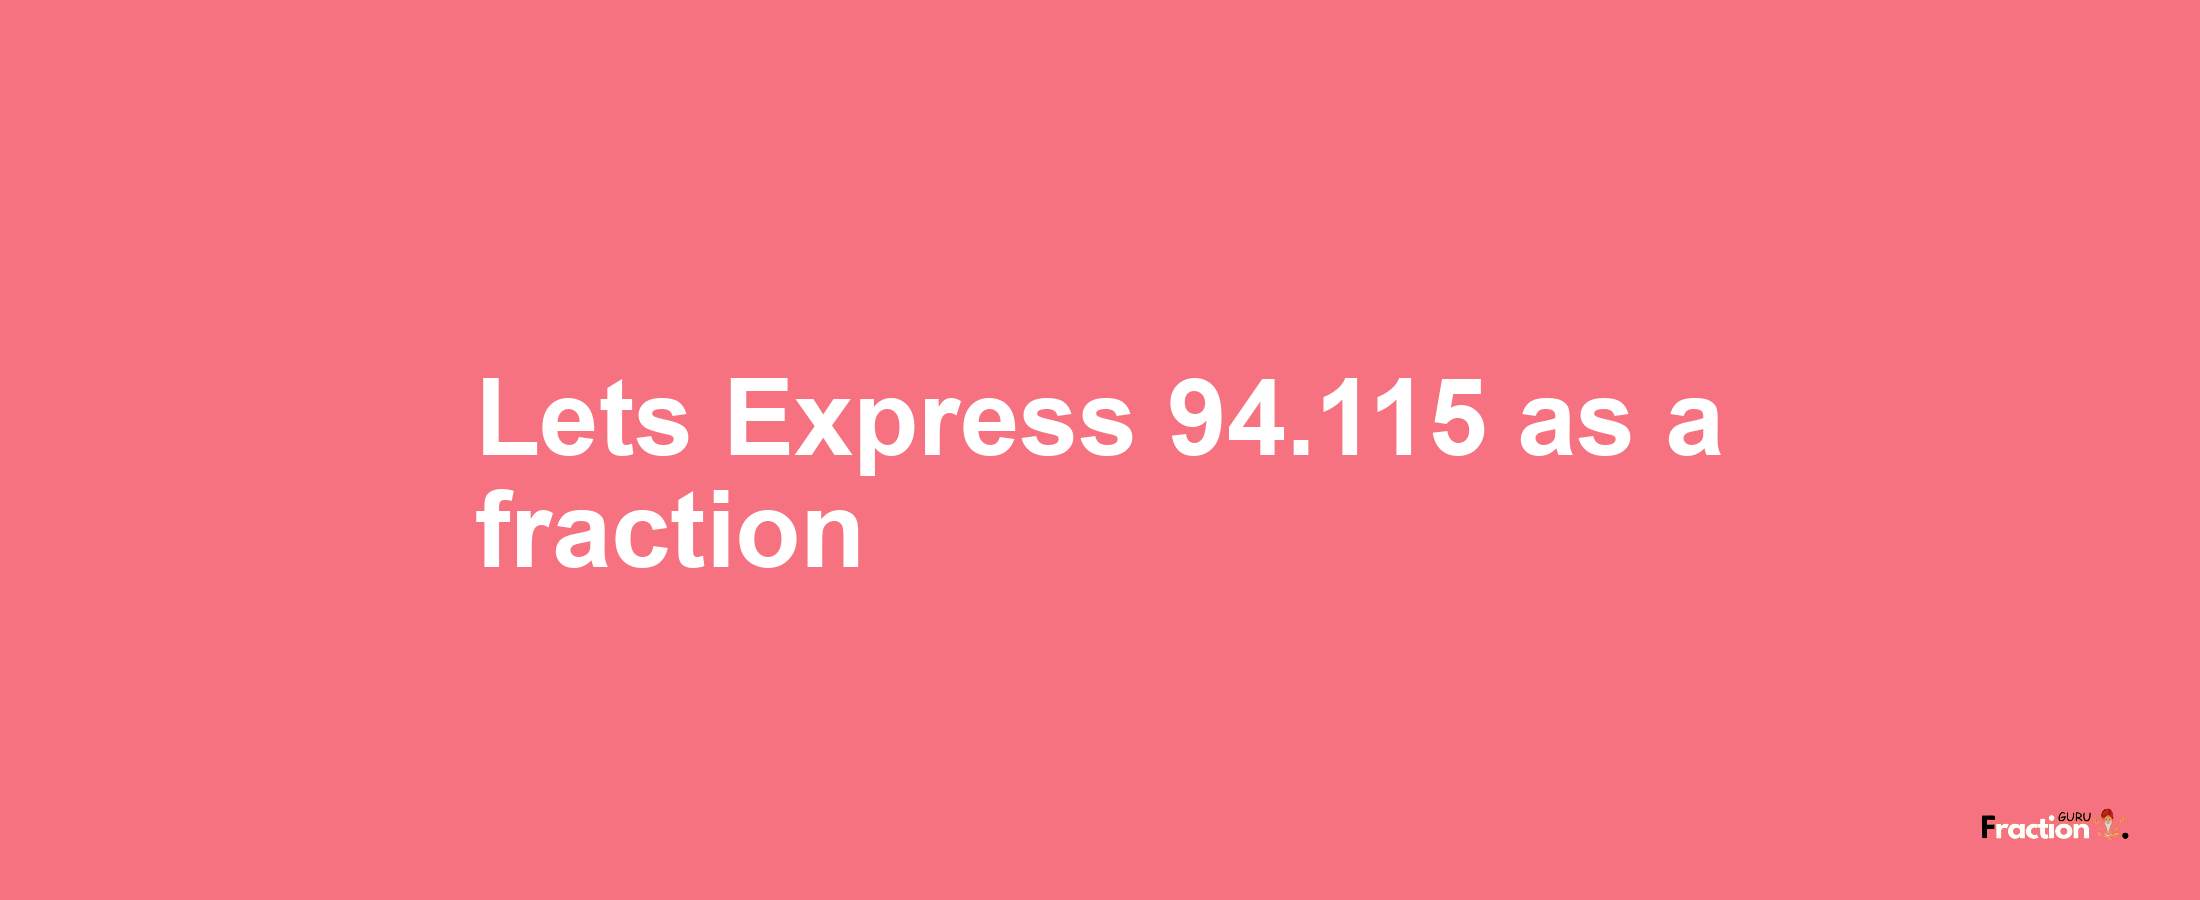 Lets Express 94.115 as afraction